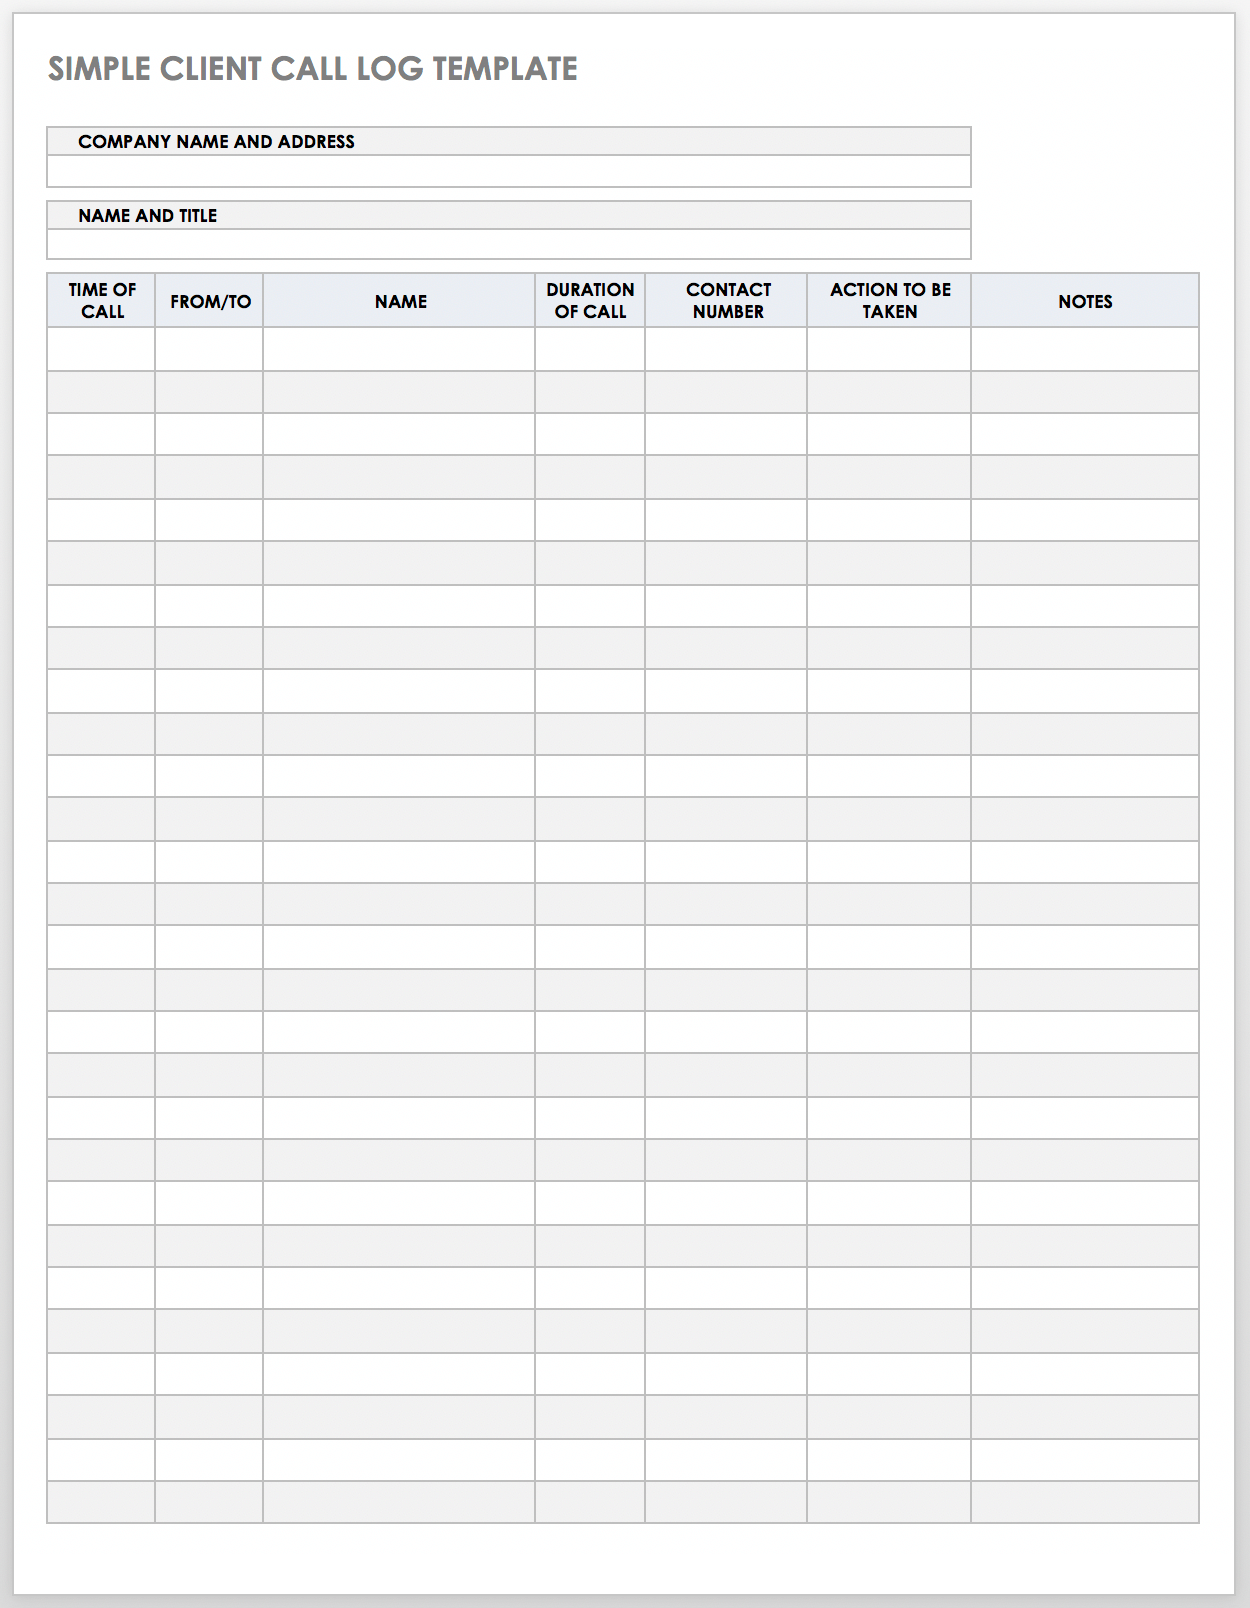 Free Client Call Log Templates  Smartsheet For Sales Rep Call Report Template